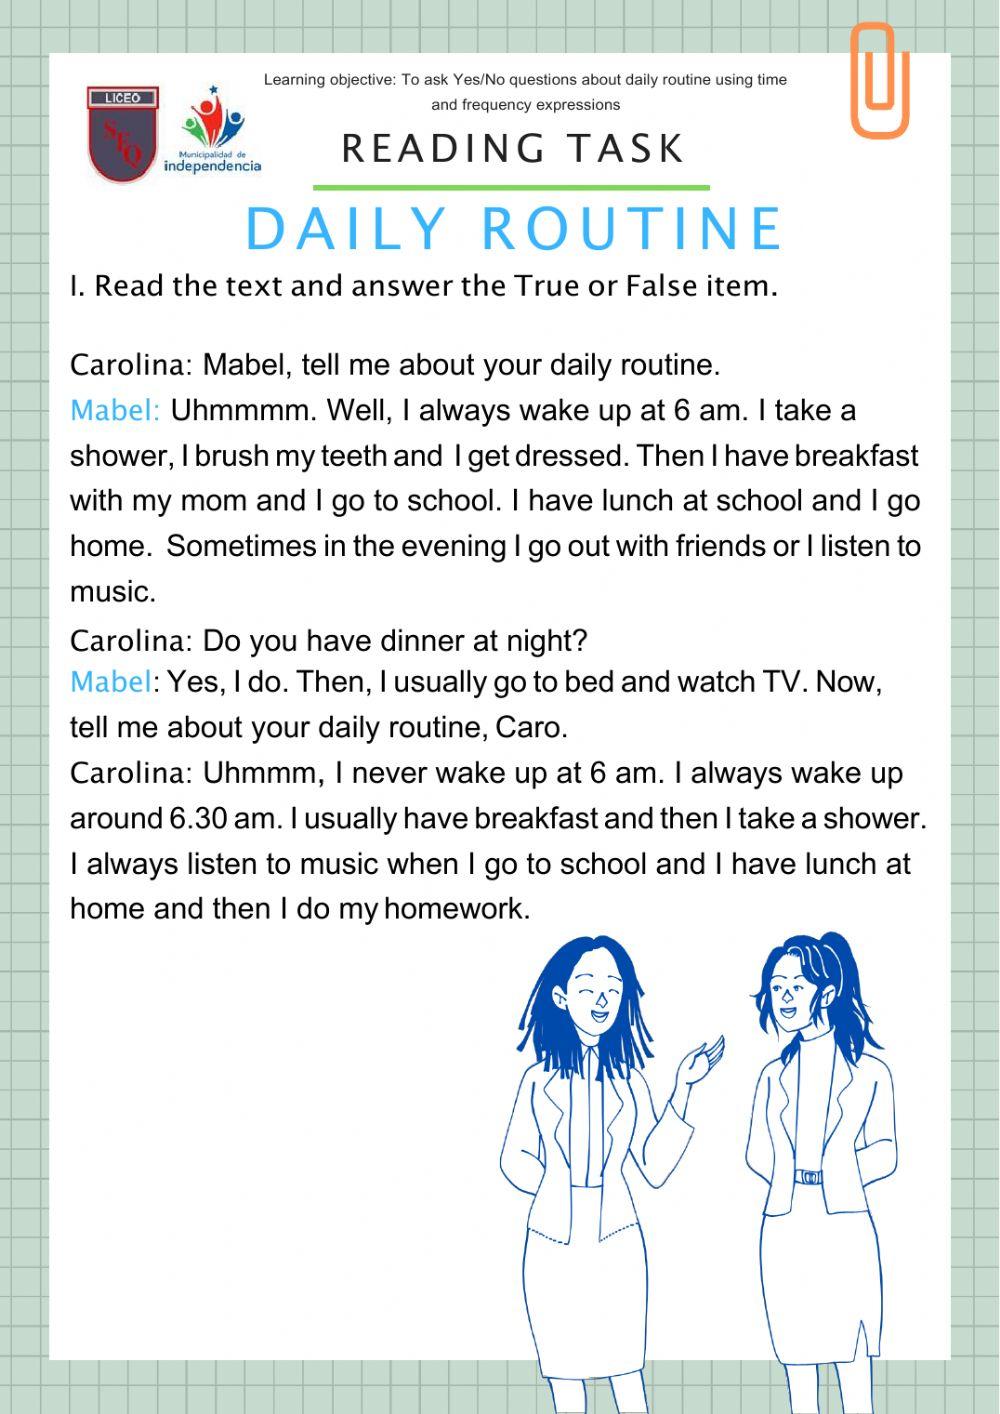 Reading about Daily Routine